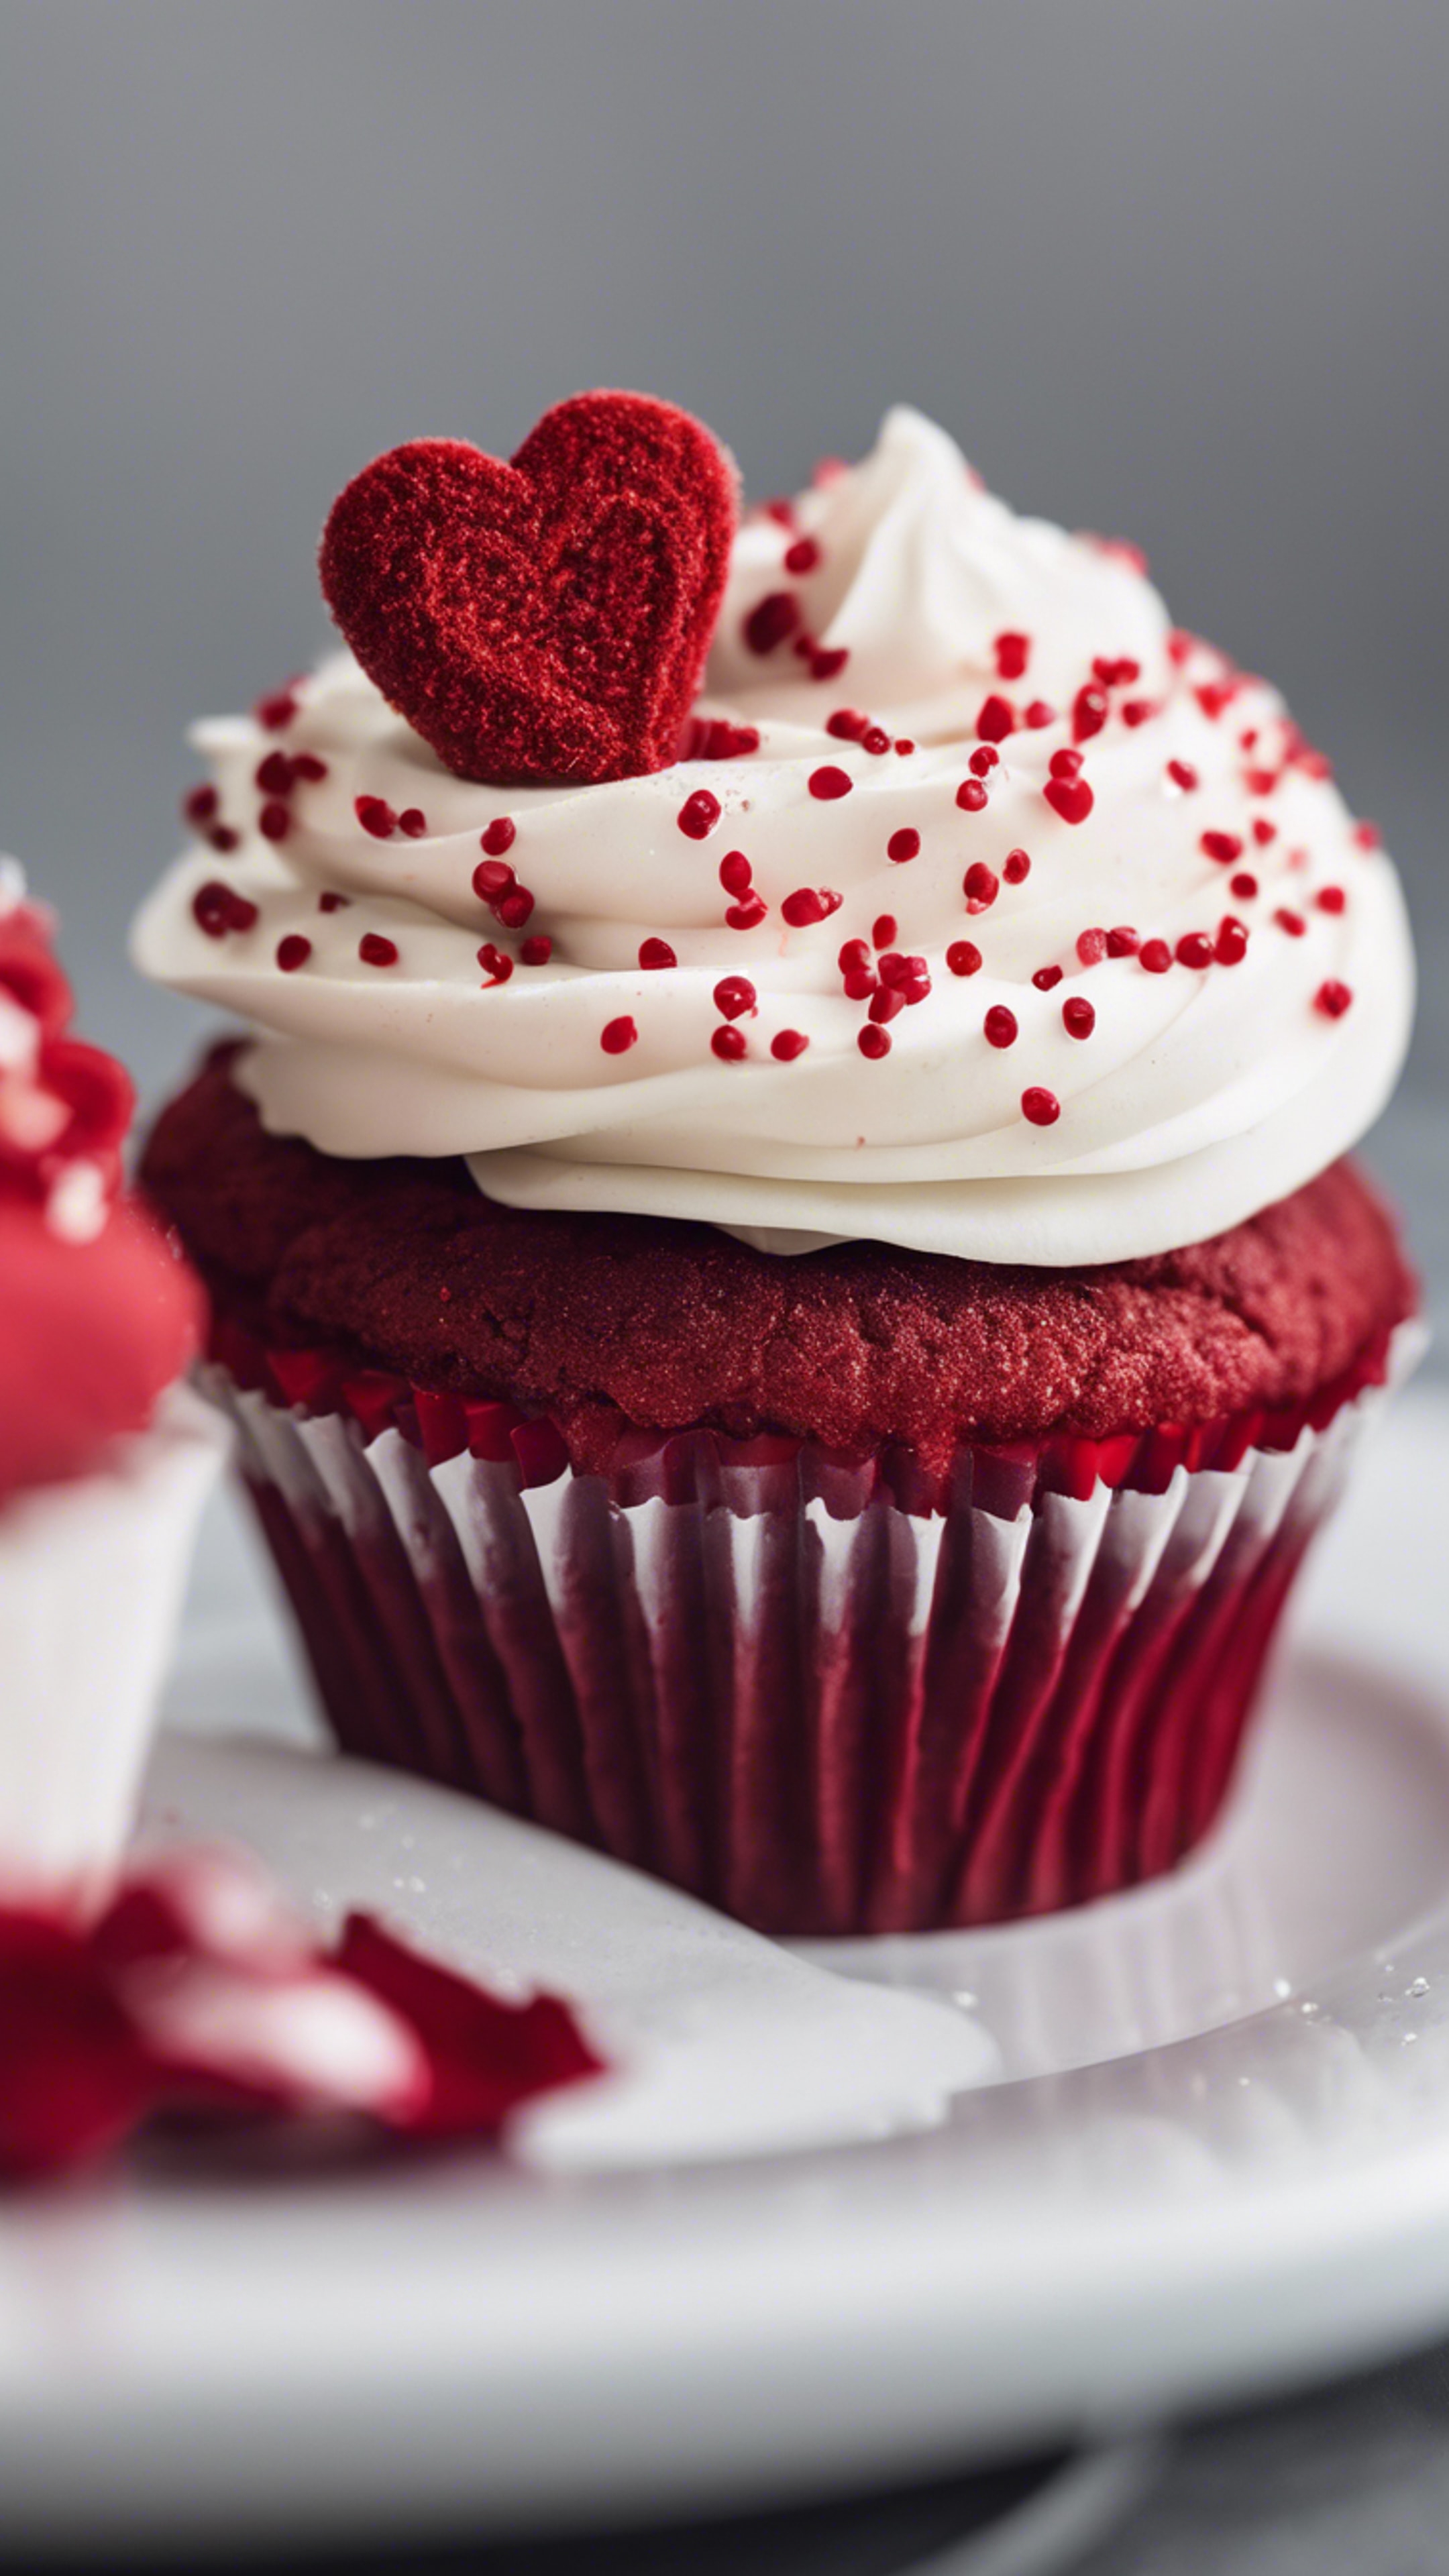 A red velvet cupcake with a heart-shaped sprinkle on top, presented on a white ceramic plate. Валлпапер[2d98083c137b4c3e8f81]